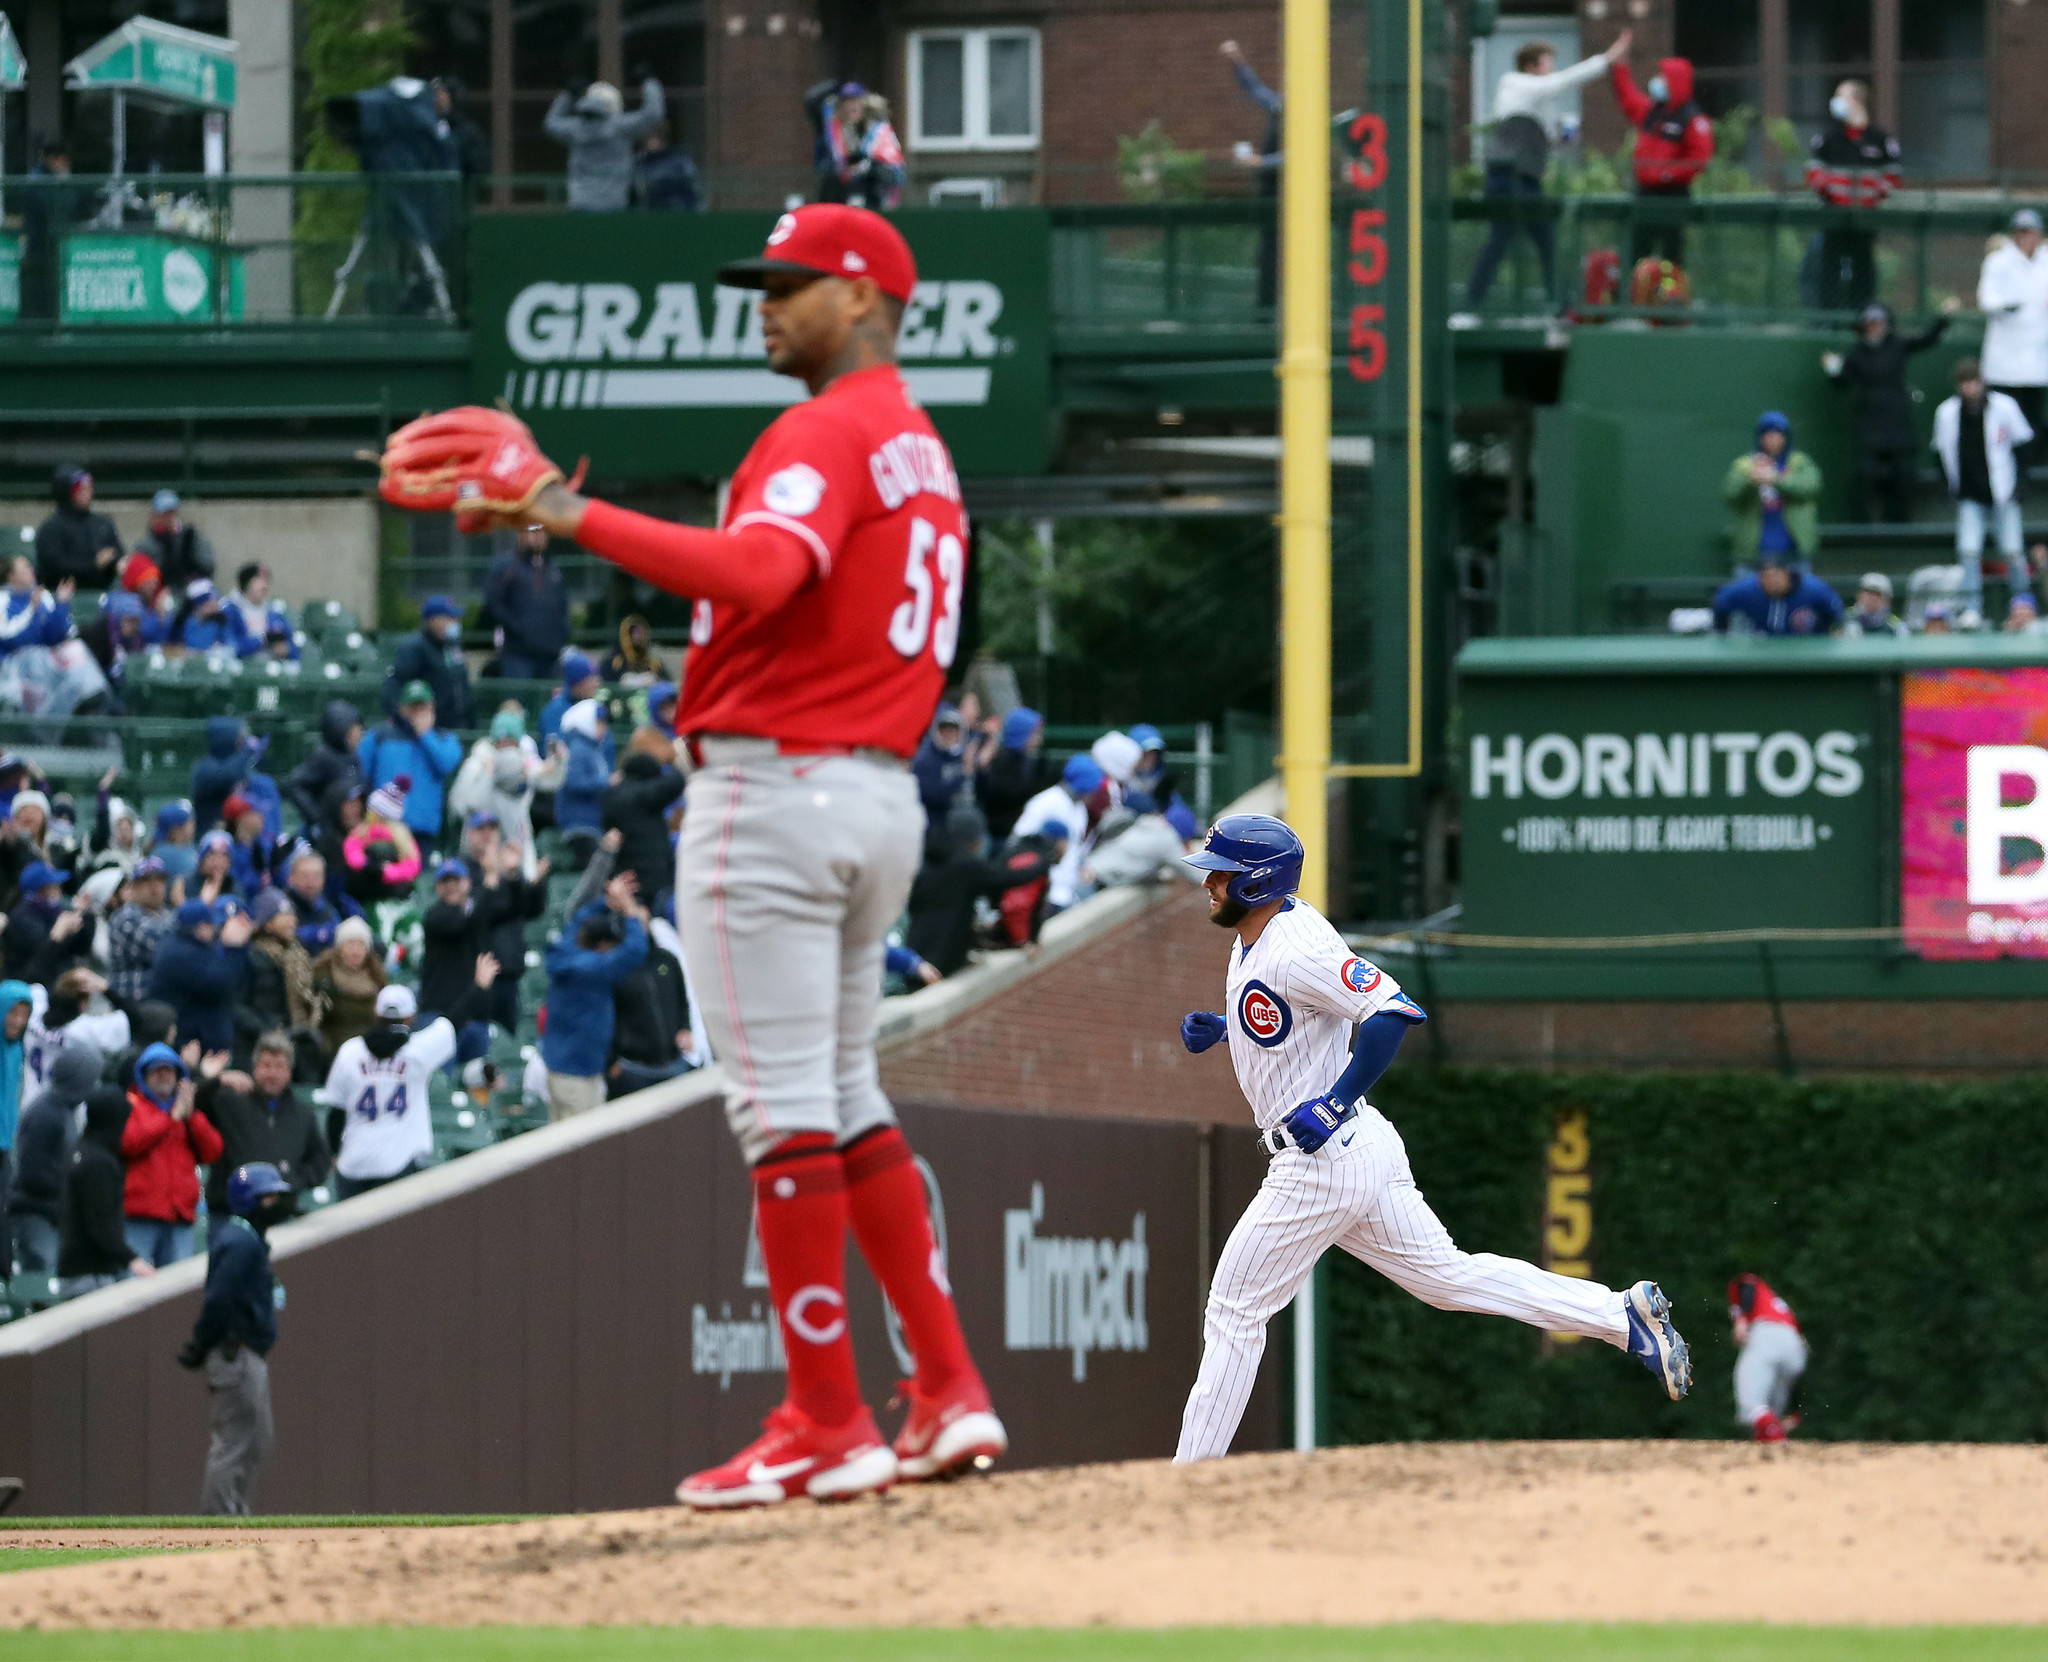 Adbert Alzolay escapes shaky ninth to preserve Cubs' win over Royals -  Chicago Sun-Times